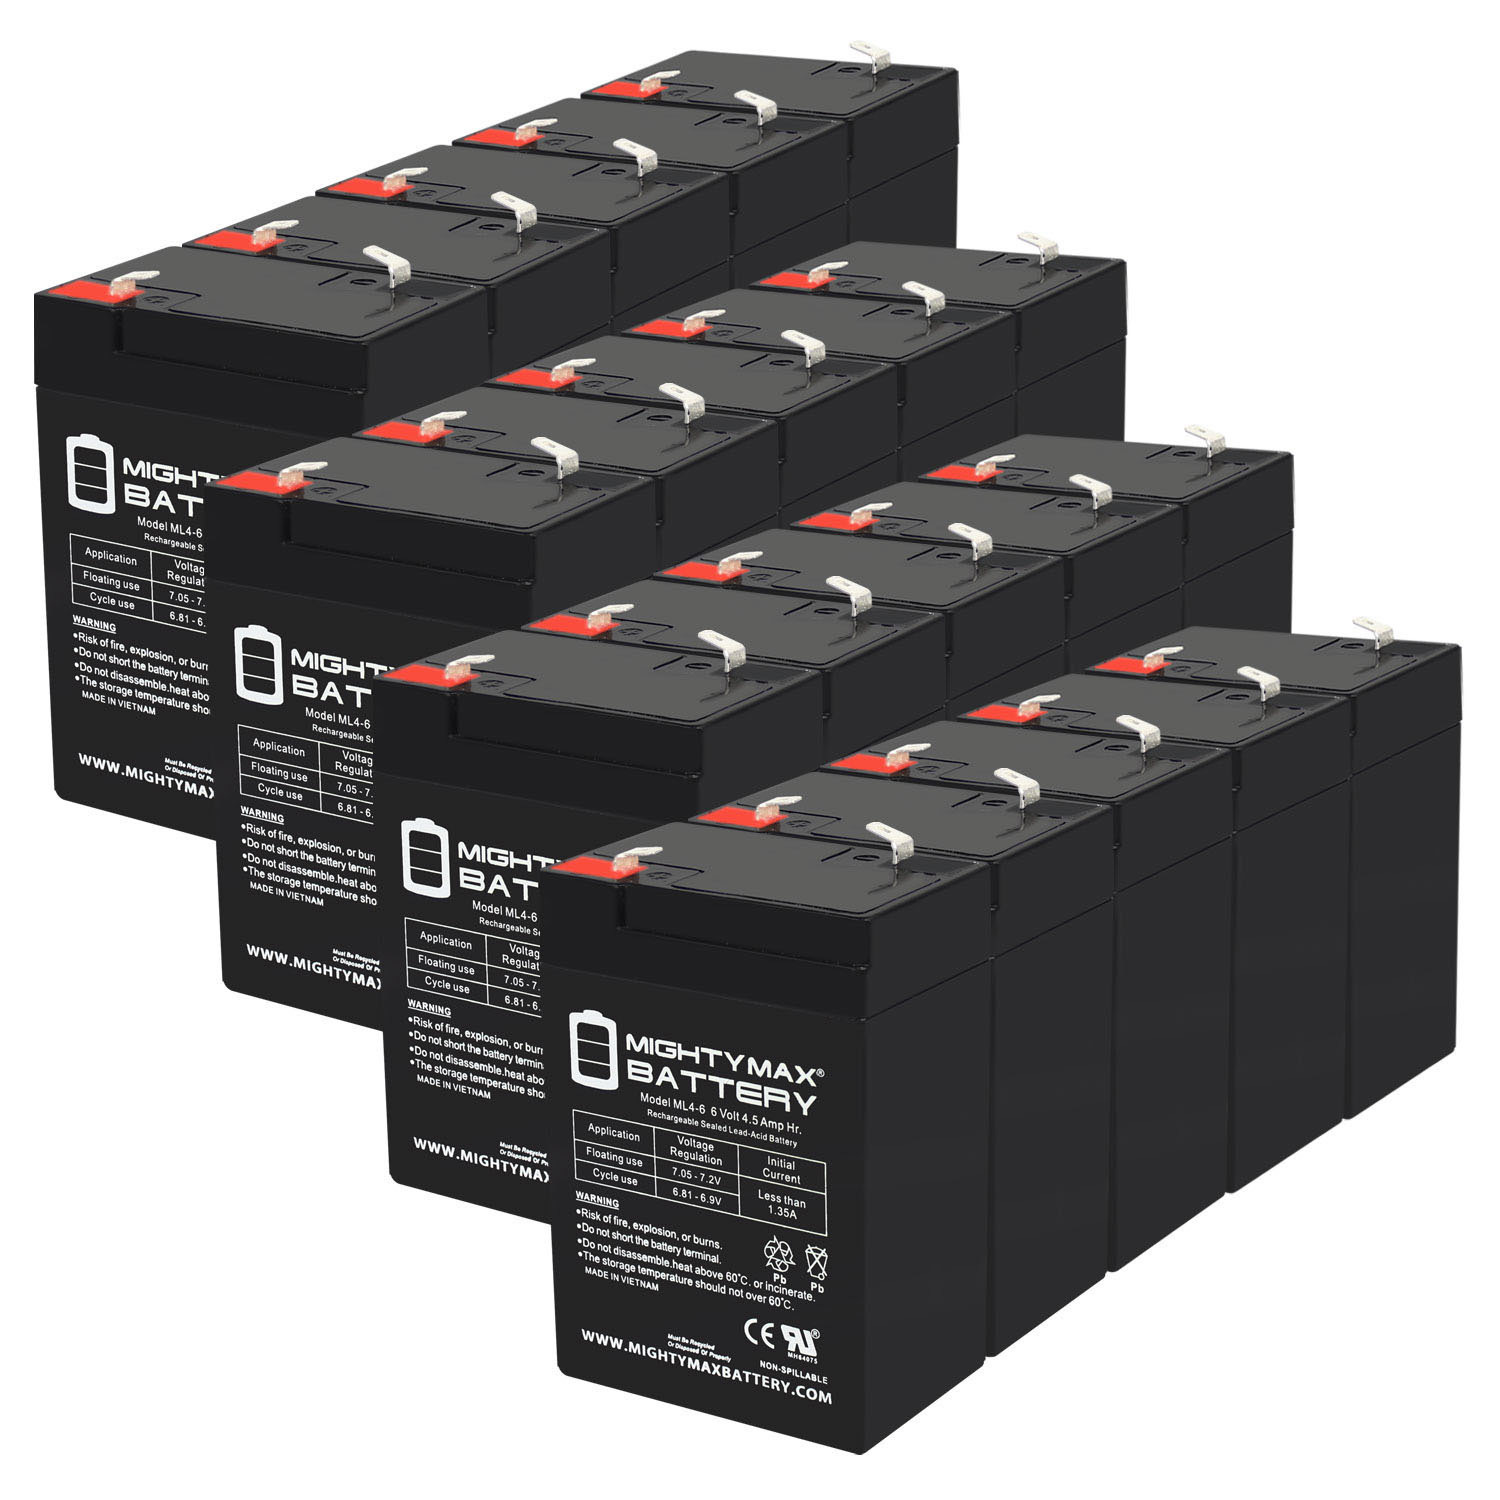 6V 4.5AH SLA Replacement Battery for Astralite EU-2-7 - 20 Pack